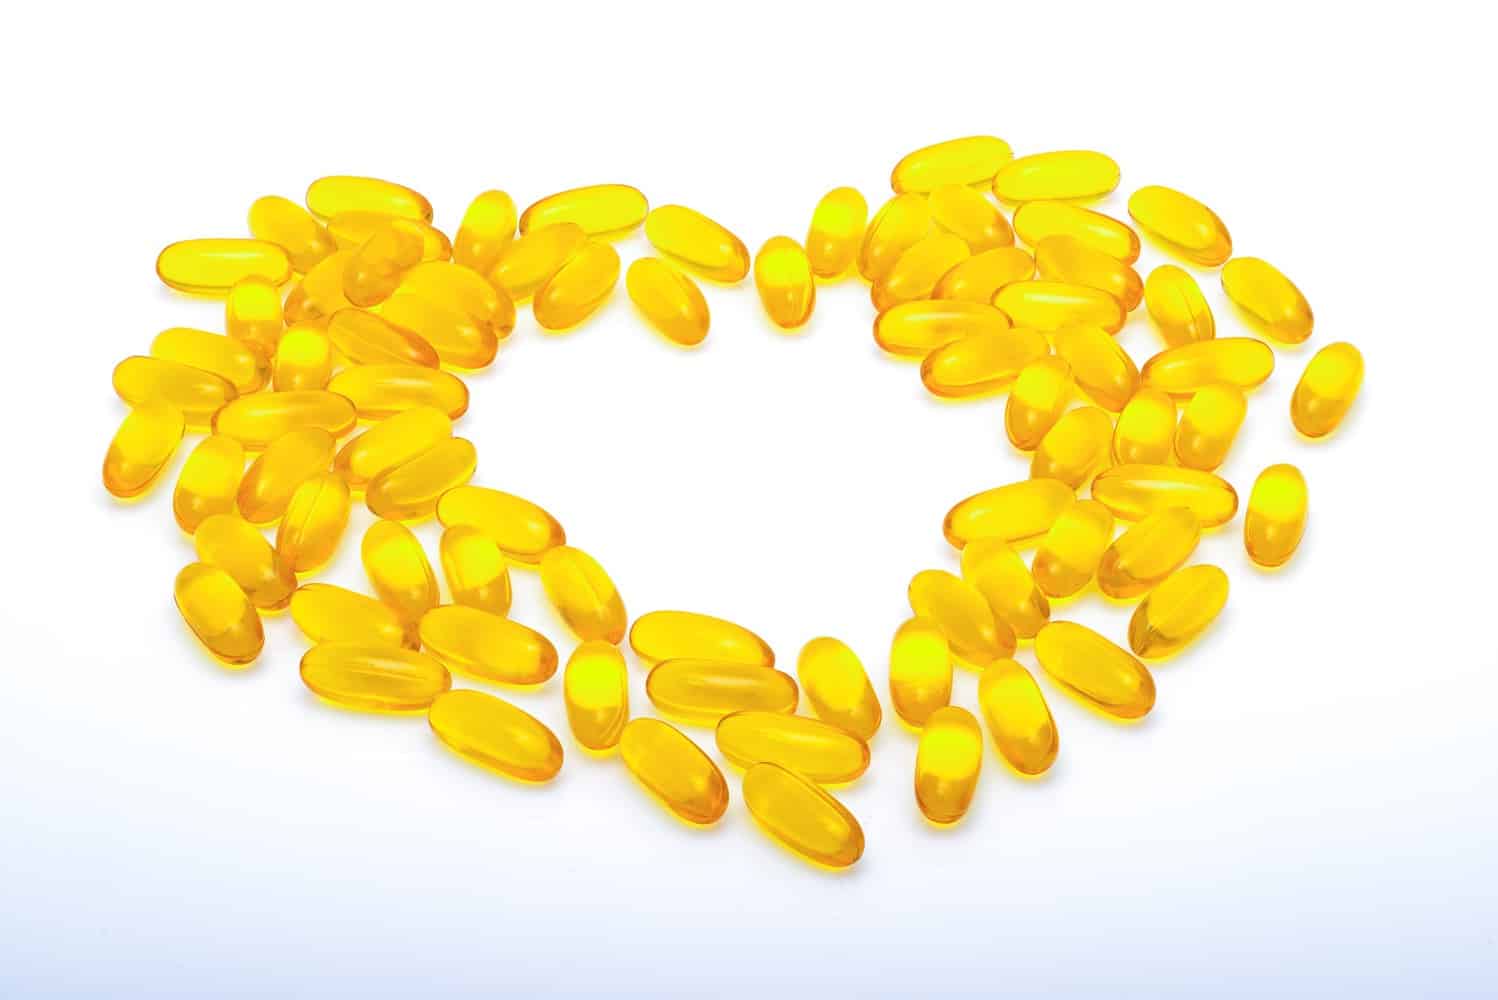 Fish oil capsules forming the shape of a heart.